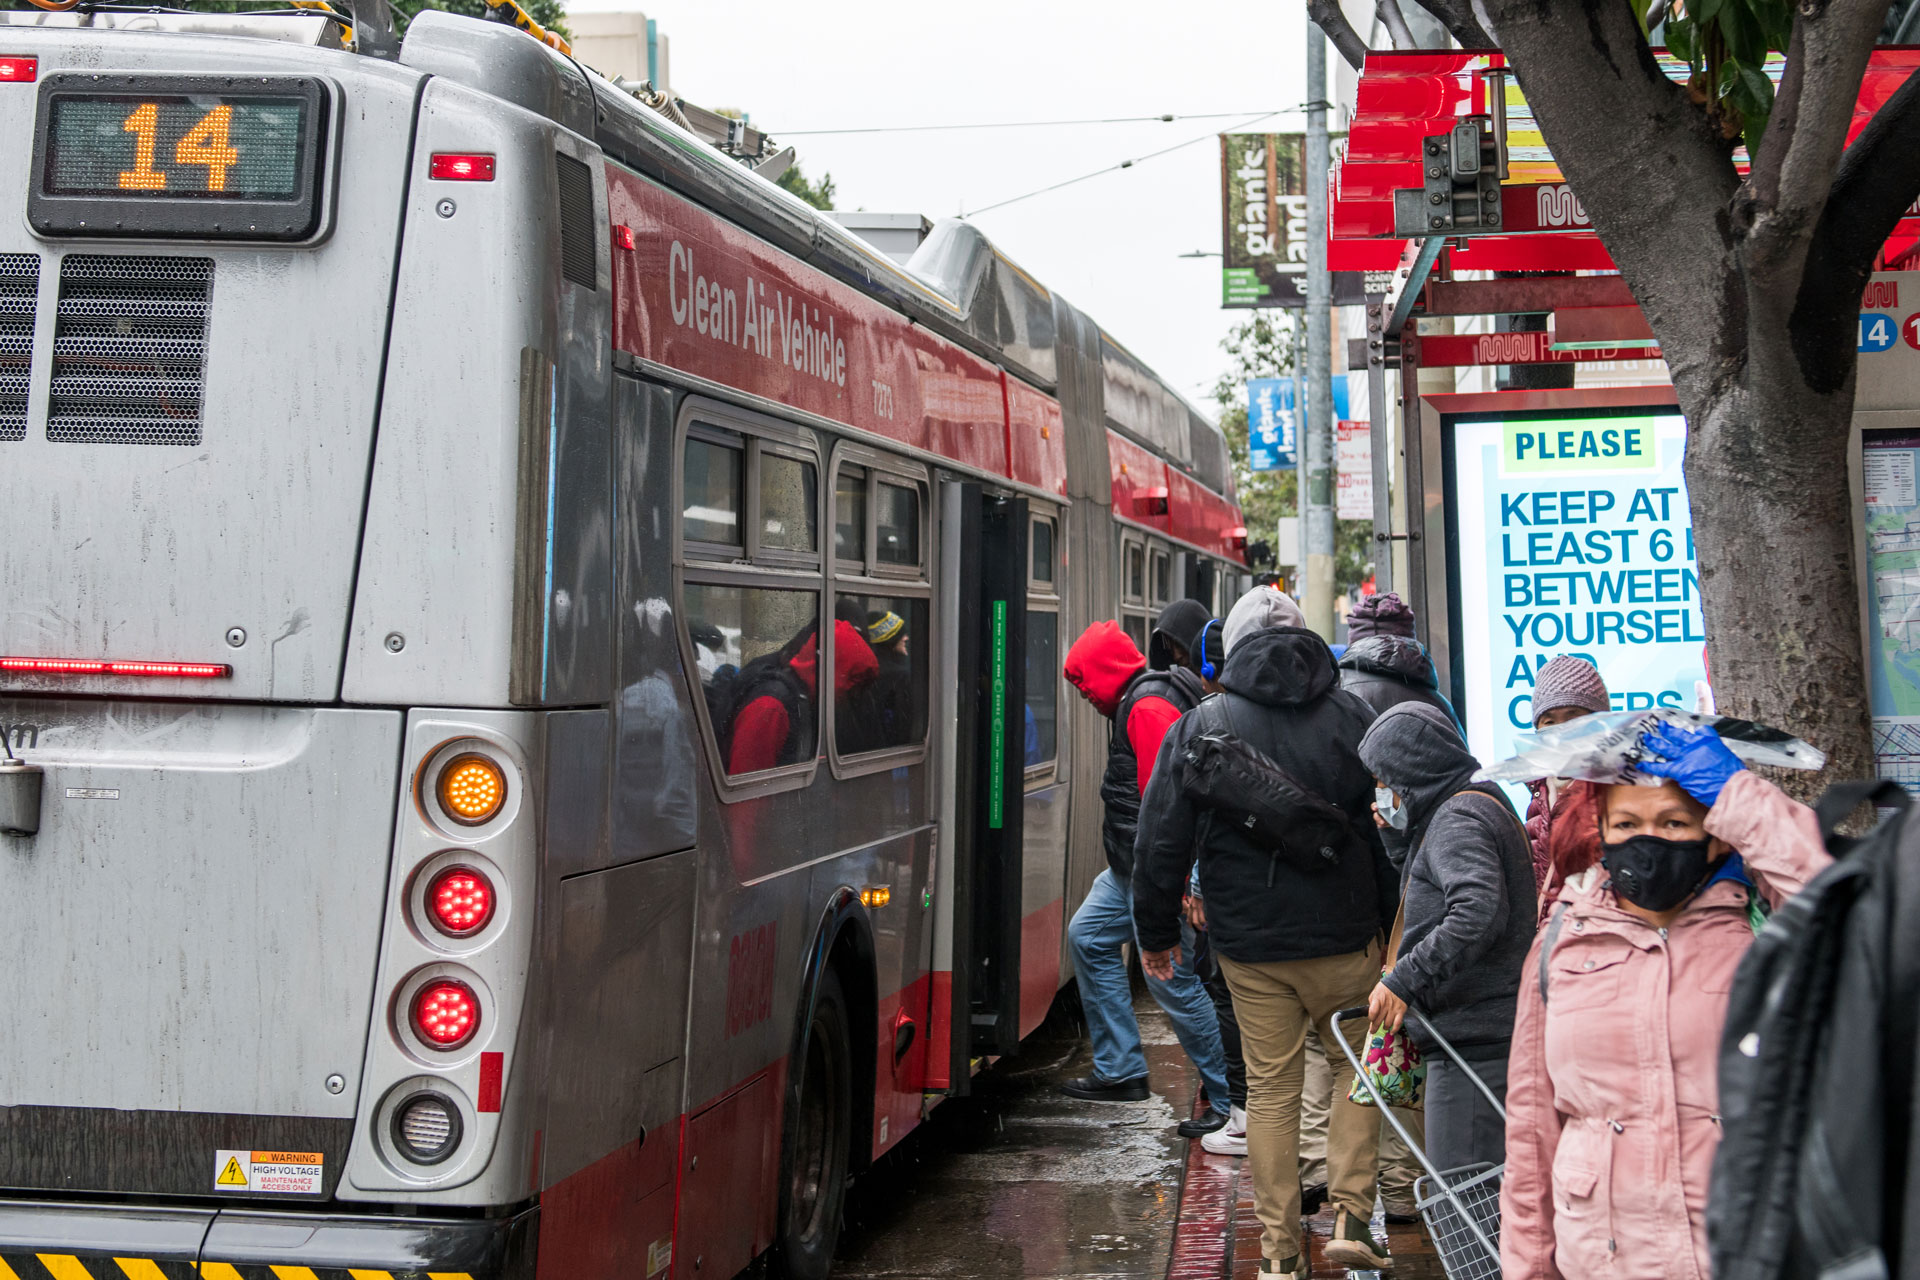 Passengers board the 14-Mission on 4th and Mission Streets in San Francisco on April 6, 2020.